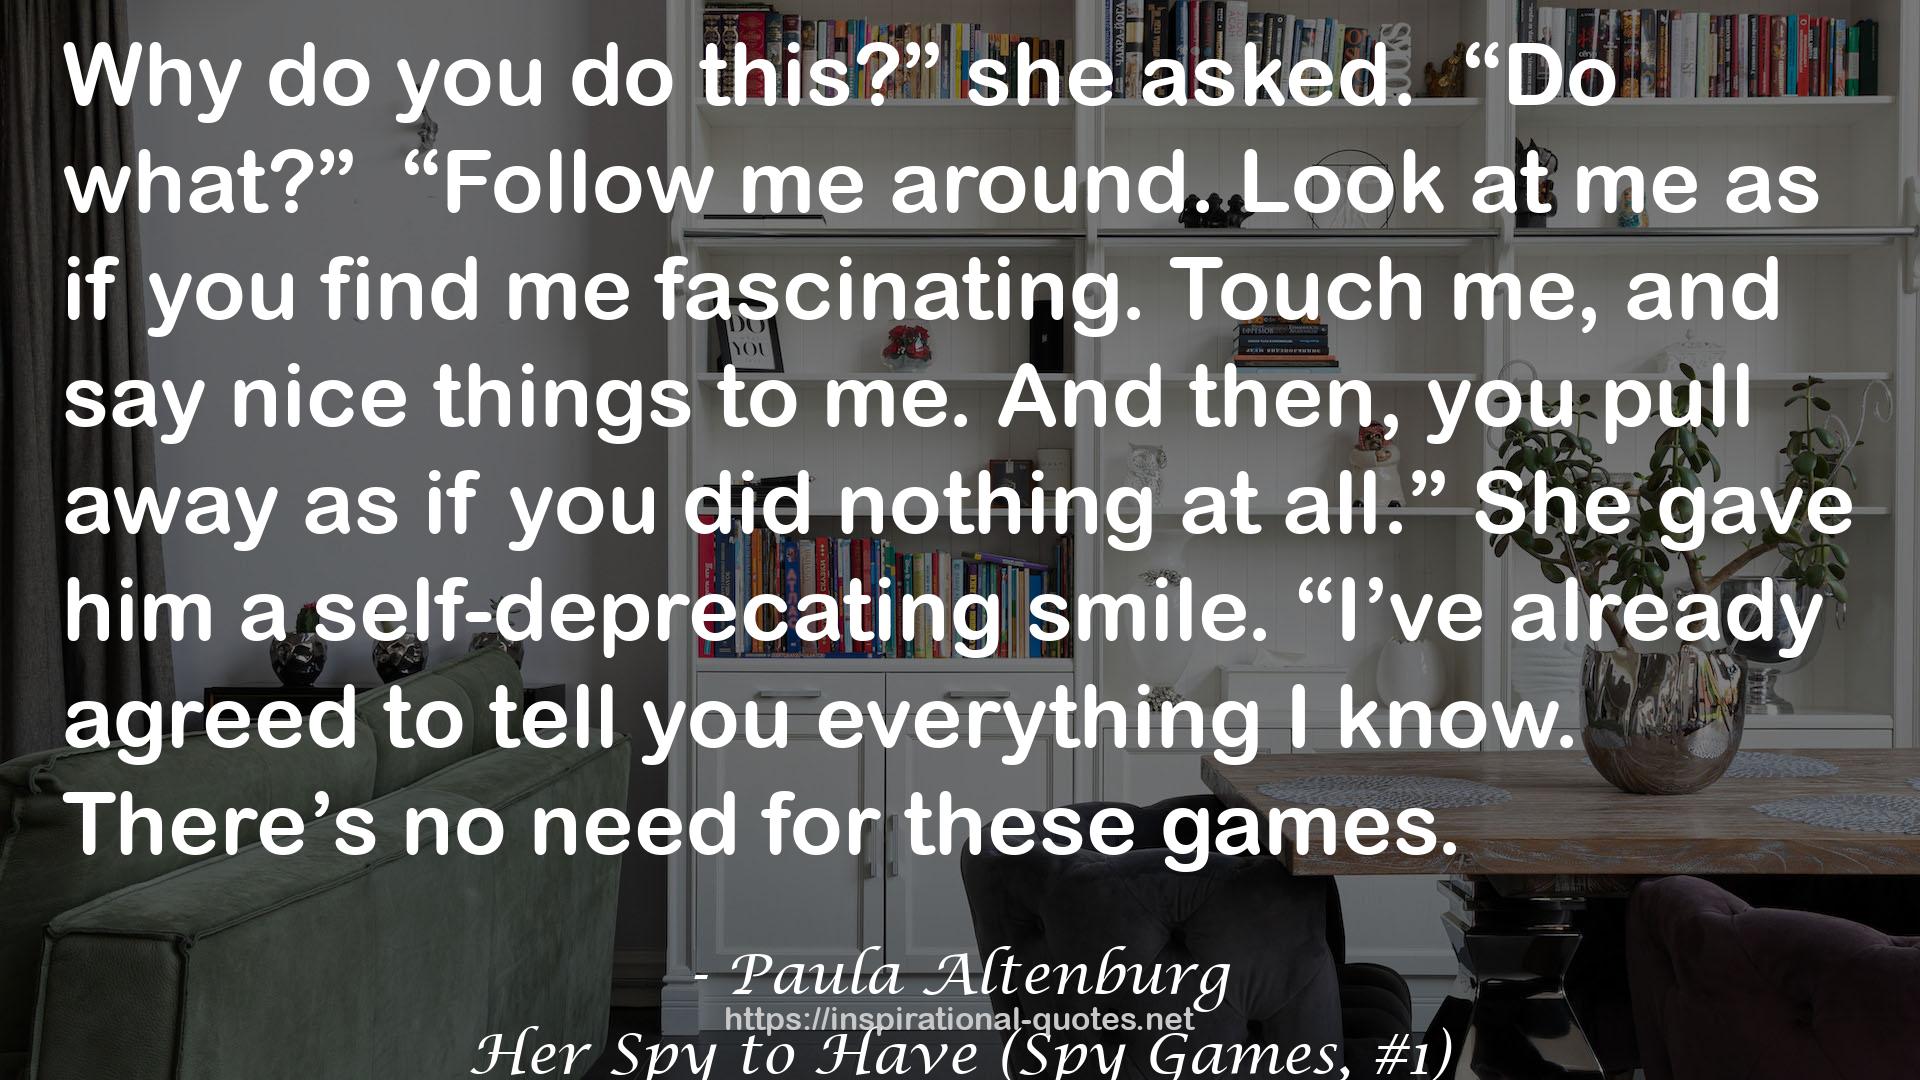 Her Spy to Have (Spy Games, #1) QUOTES